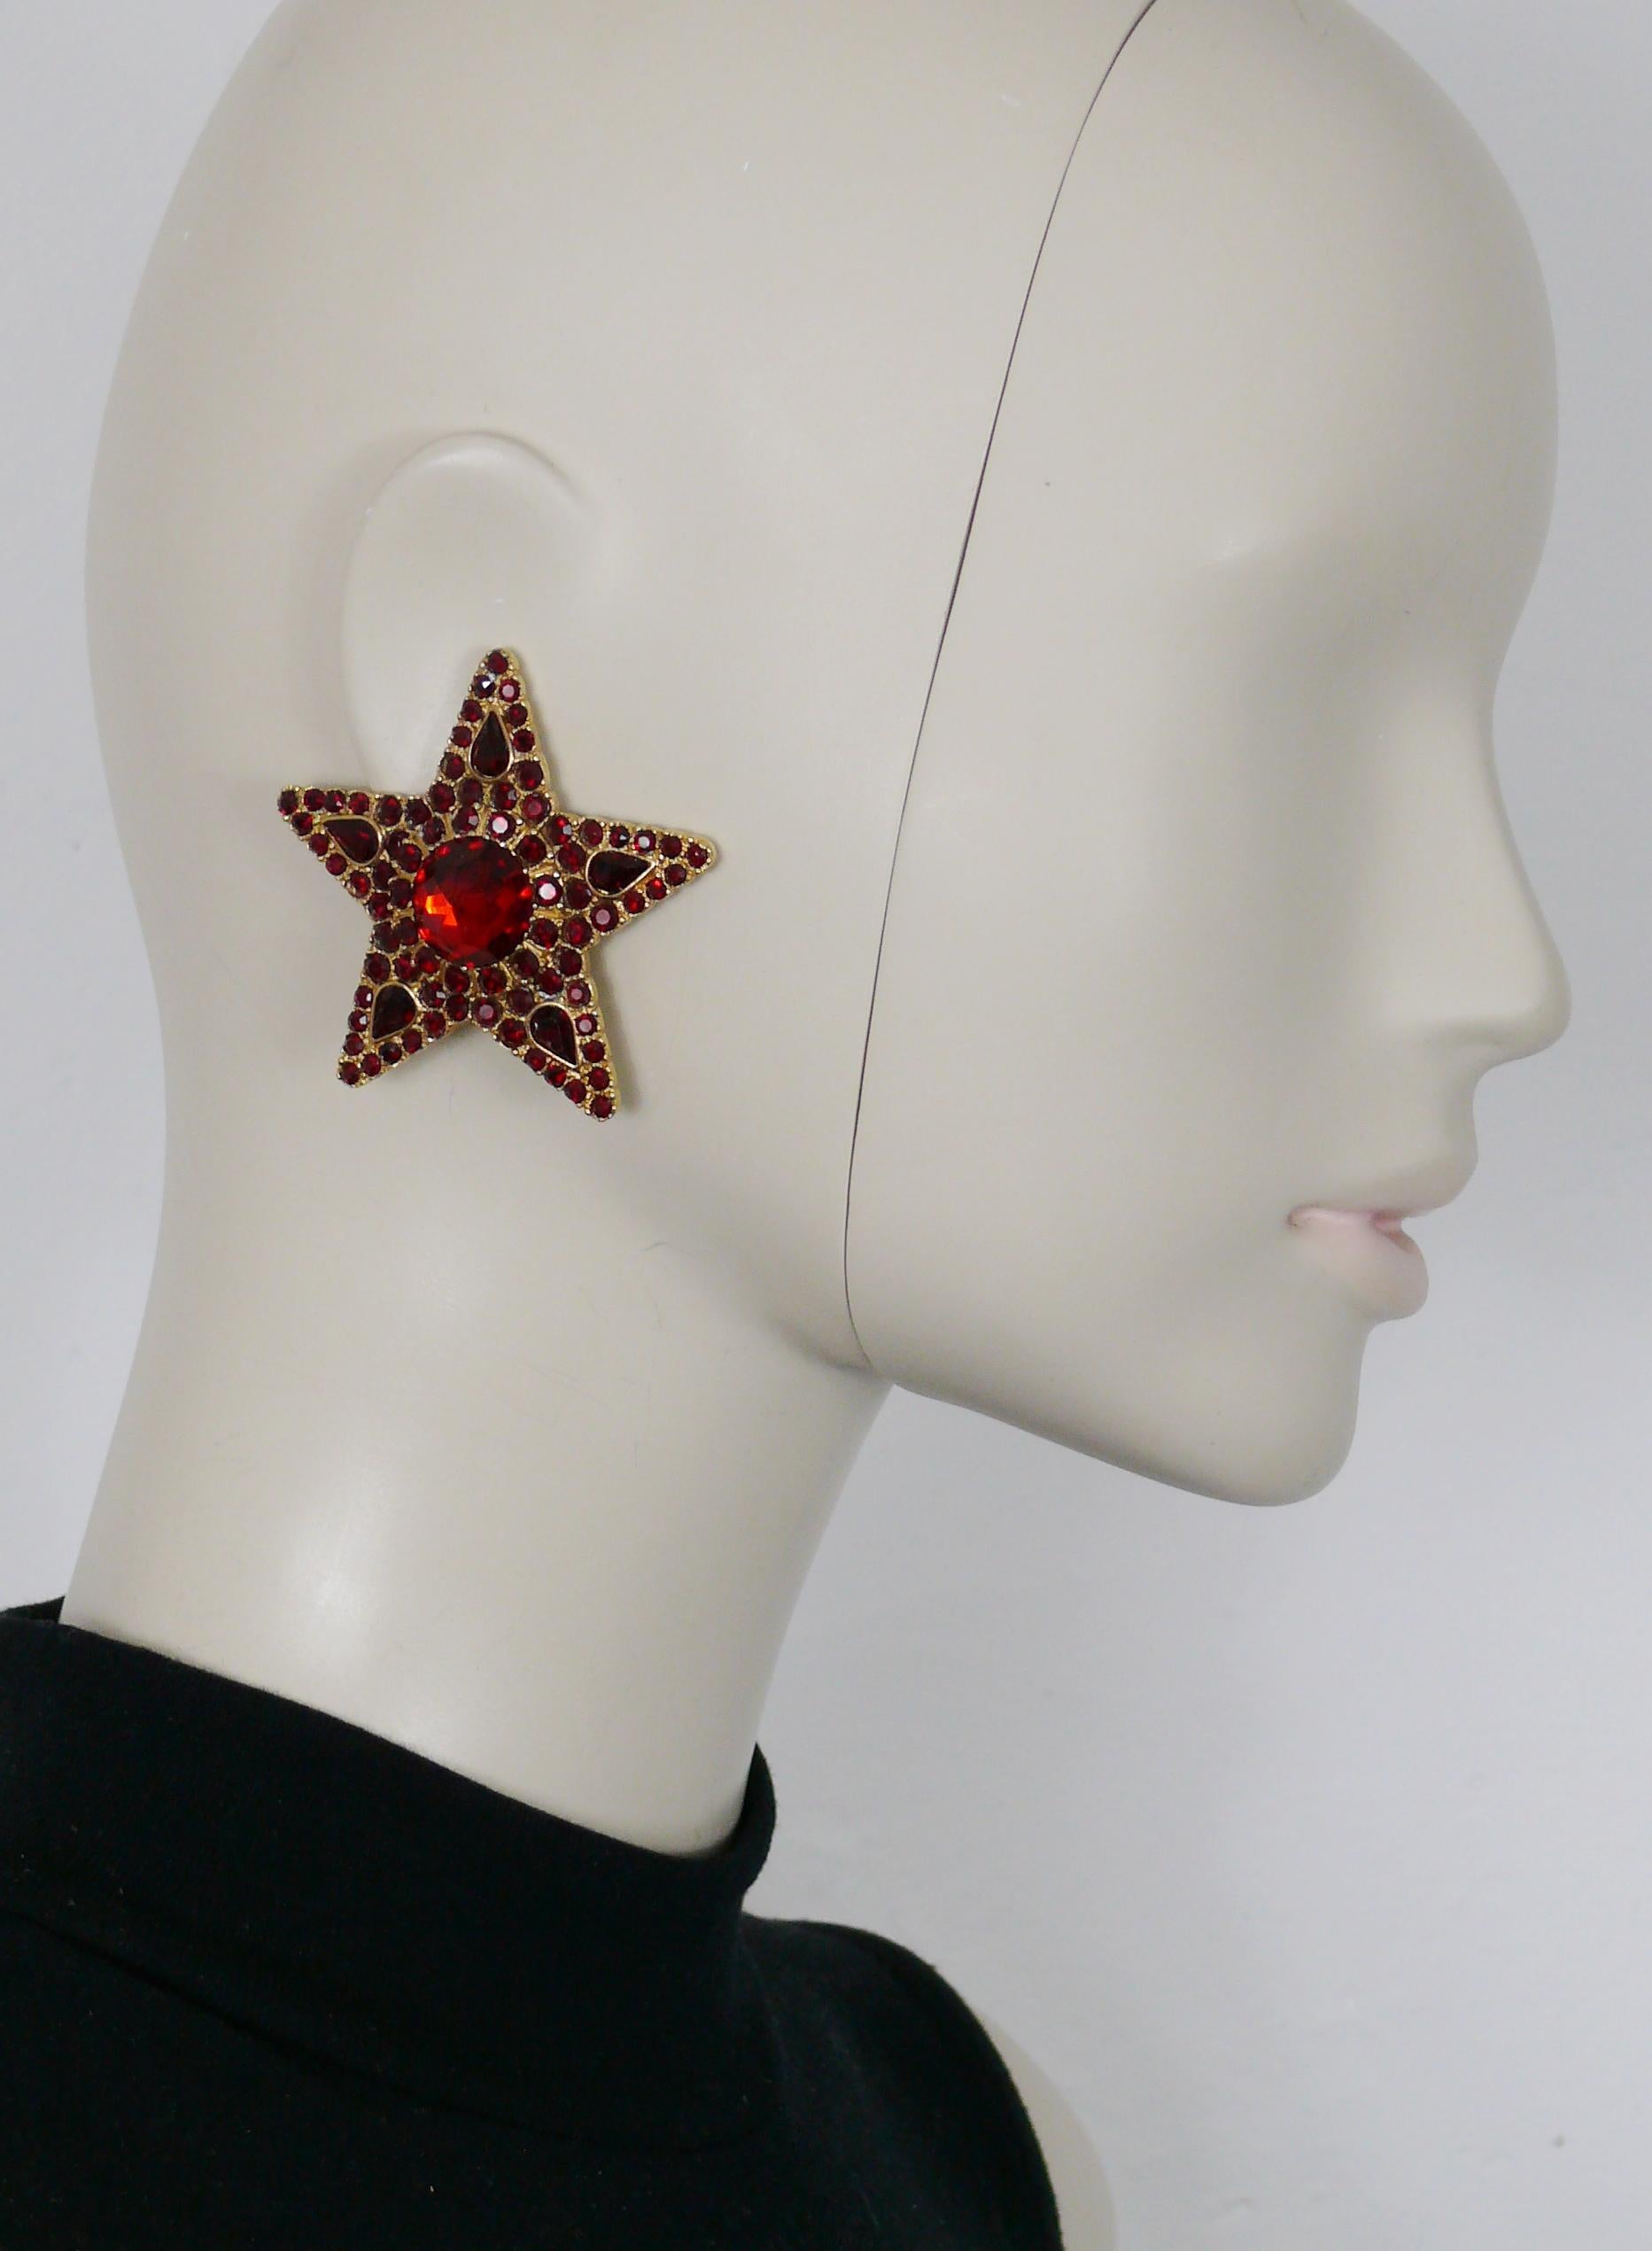 YVES SAINT LAURENT vintage massive gold toned star design clip-on earrings embellished with ruby color crystals.

Embossed YSL Made in France.

Indicative measurements : approx. 5.5 cm x 5.5 cm (2.17 inches x 2.17 inches).

Weight : approx. 25 grams